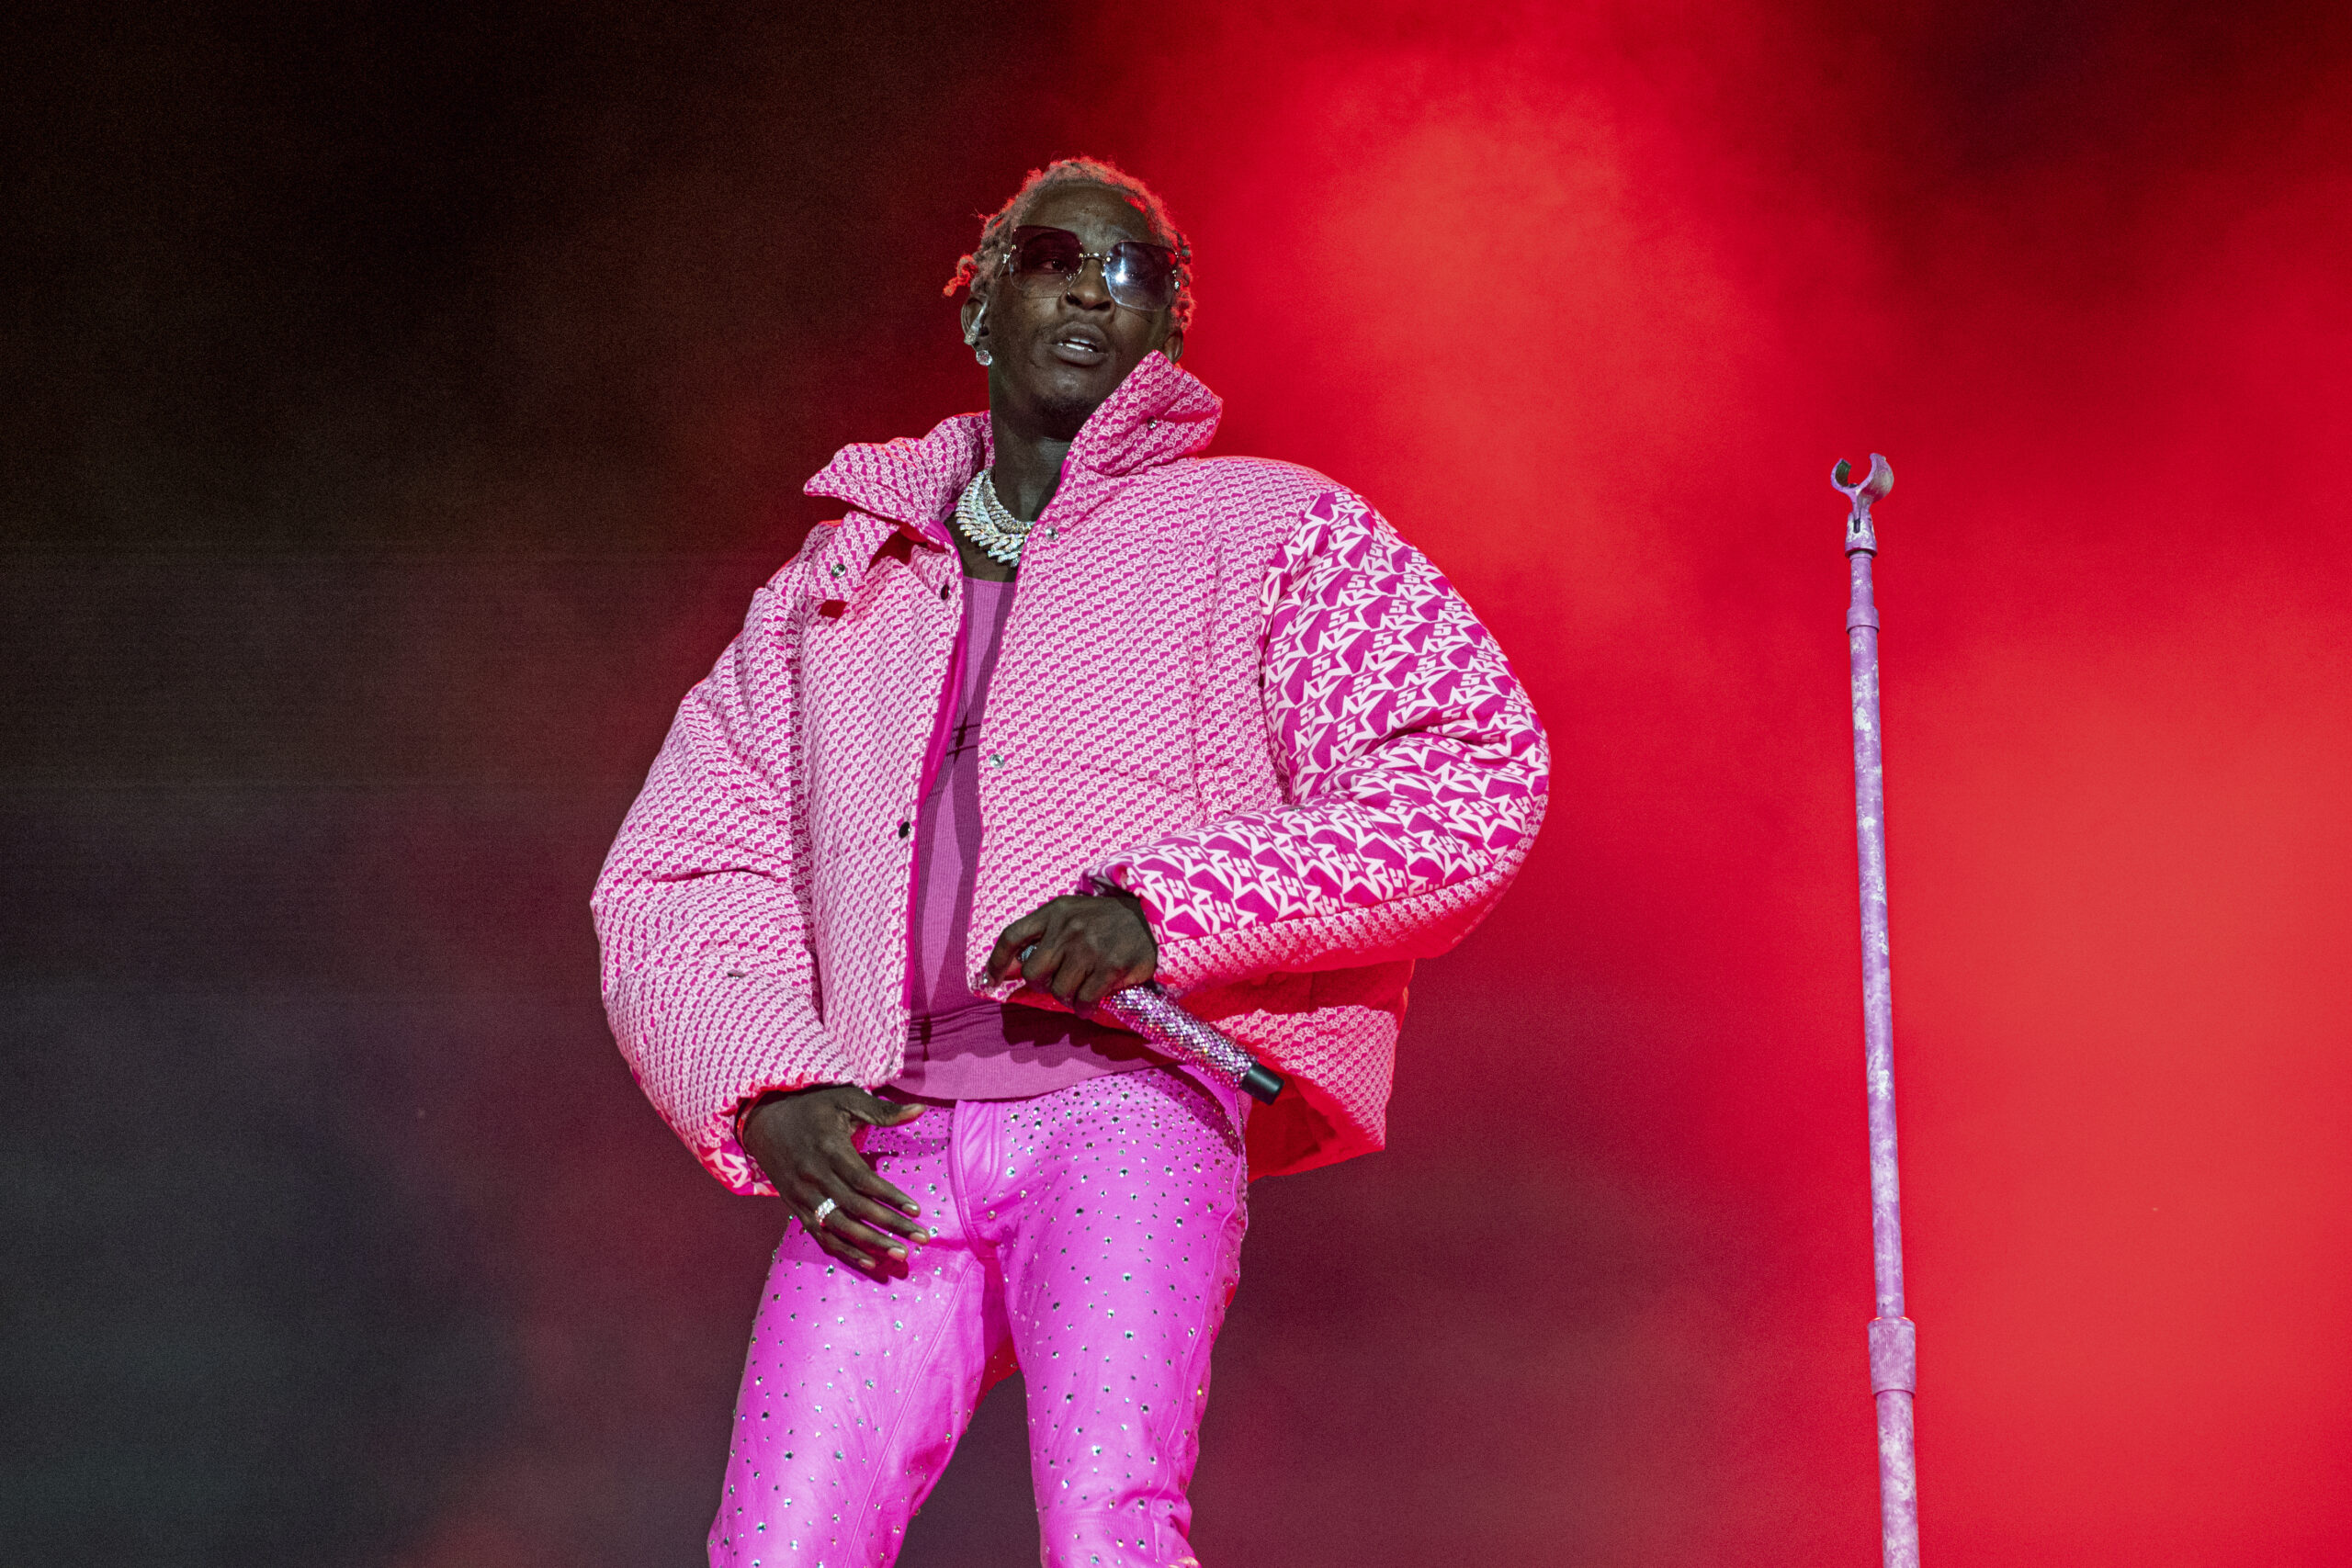 FILE - Young Thug performs on day four of the Lollapalooza Music Festival on Sunday, Aug. 1, 2021, at Grant Park in Chicago. The Atlanta rapper, whose name is Jeffrey Lamar Williams, was arrested Monday, May 9, 2022, in Georgia on conspiracy to violate the state's RICO act and street gang charges, according to jail records. (Photo by Amy Harris/Invision/AP, File)